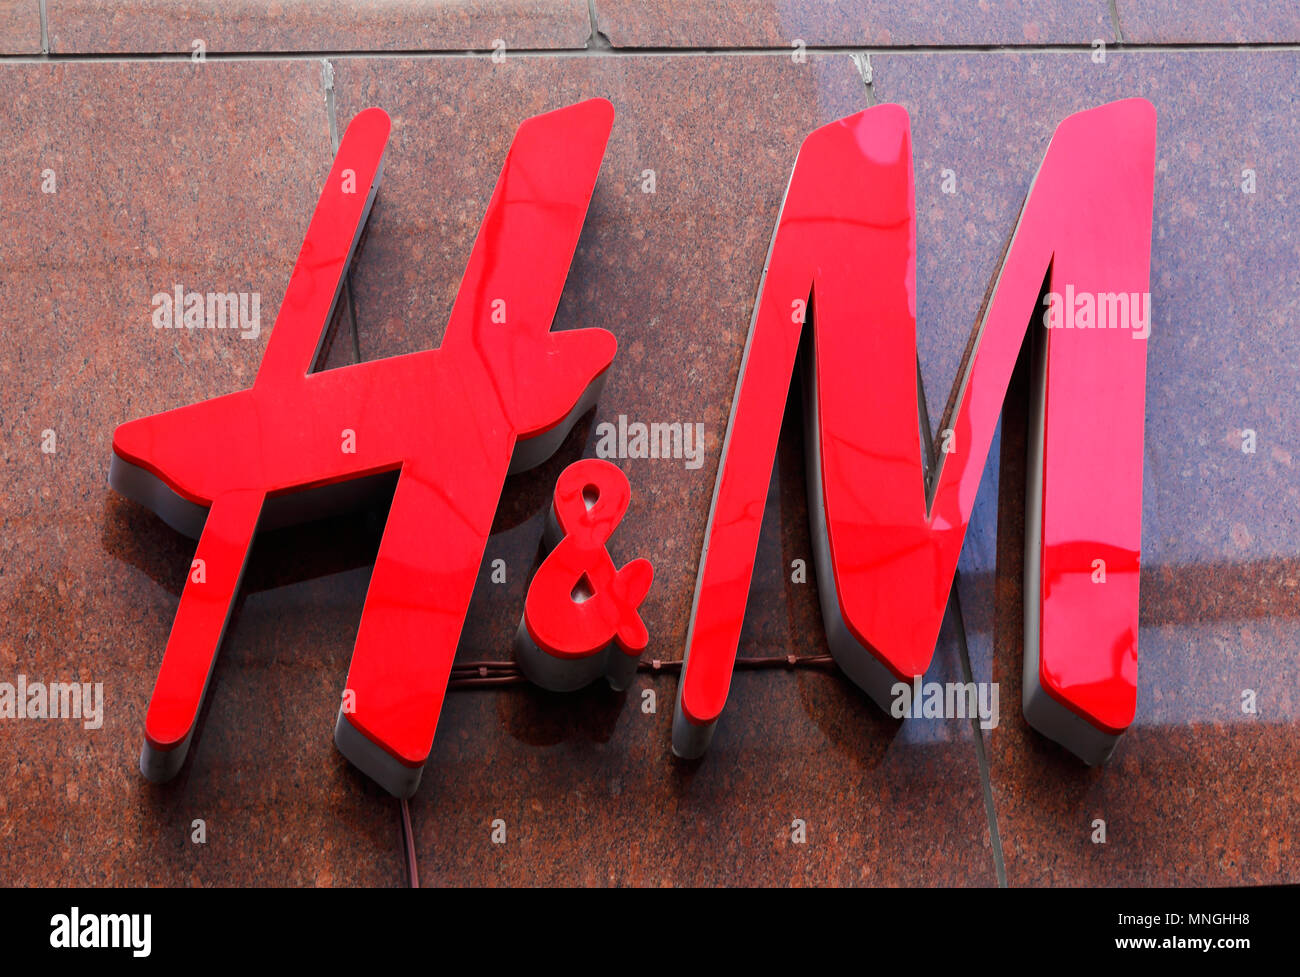 Stockholm, Sweden - May 18, 2017: The Swedish multinational clothing-retail company Hennes  and Mauritz H&M logo at shop on Klarabergsgatan in downtow Stock Photo